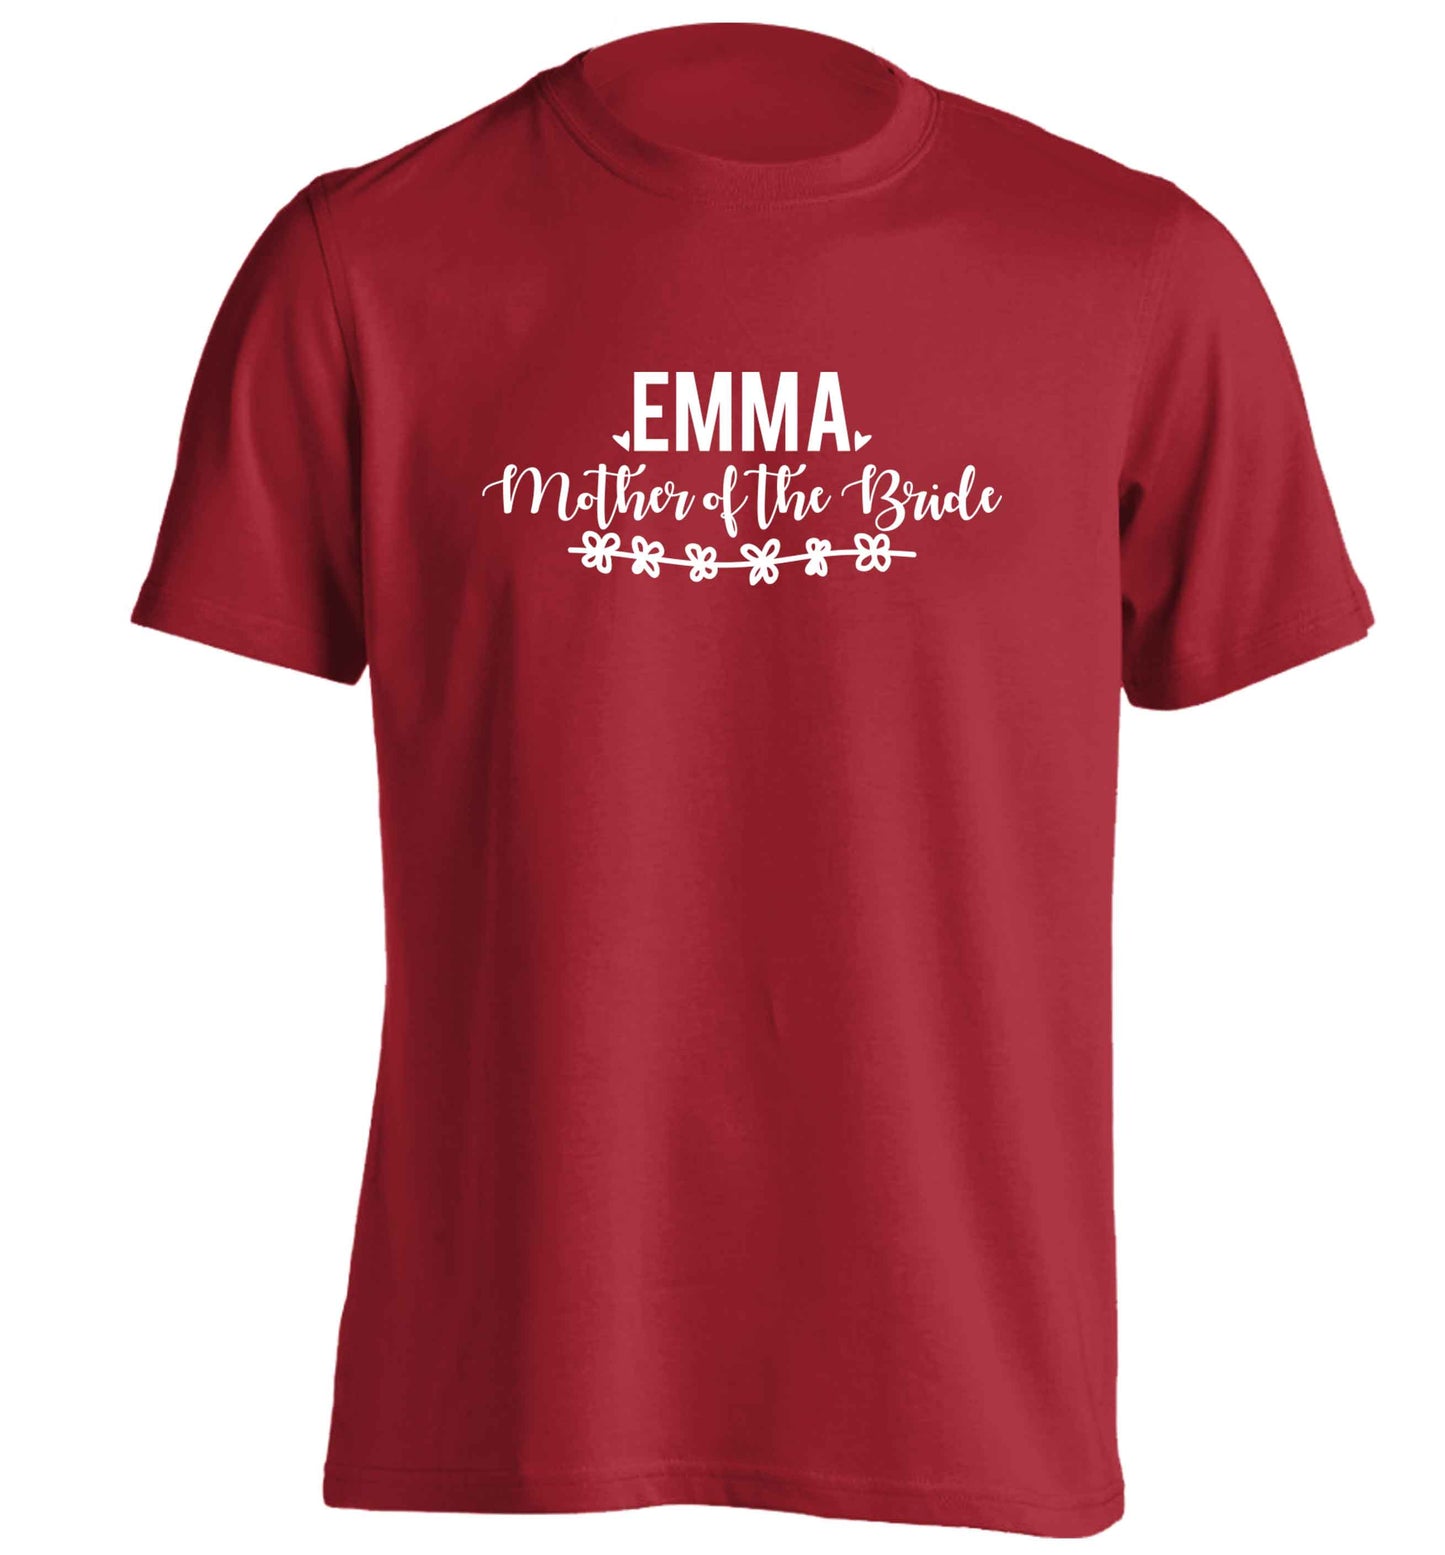 Personalised mother of the bride adults unisex red Tshirt 2XL